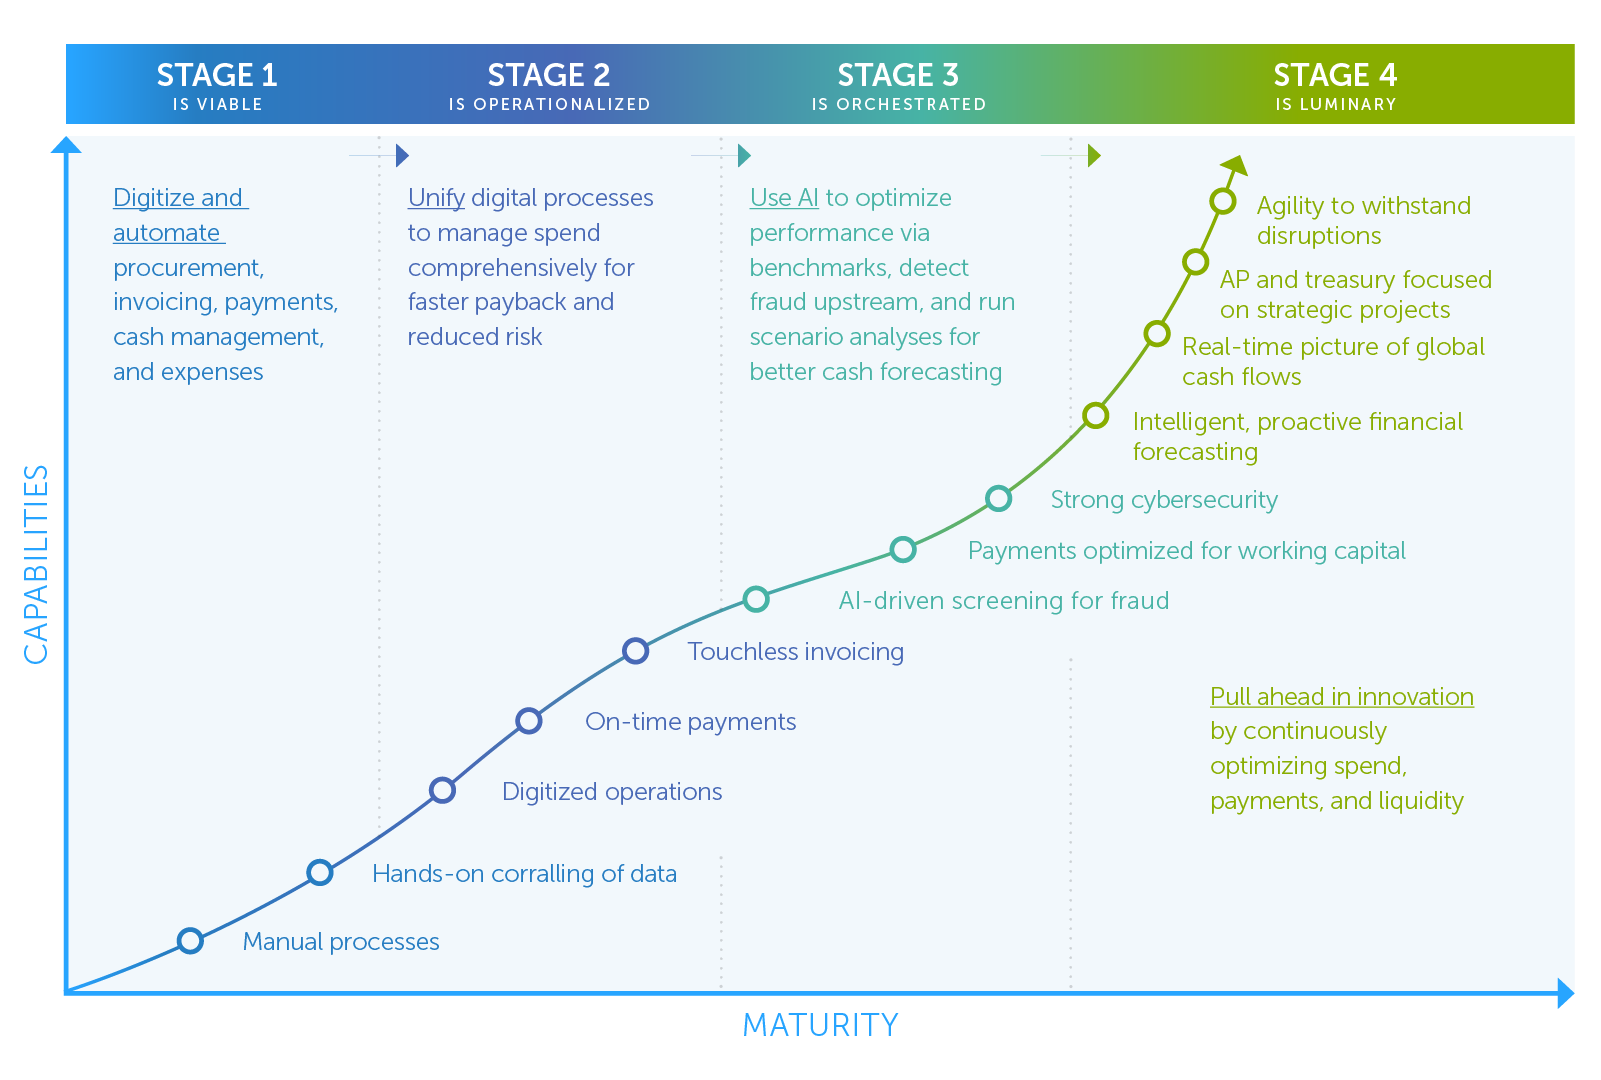 The 4 Stages of Maturity to Futureproof Financial Health | Coupa